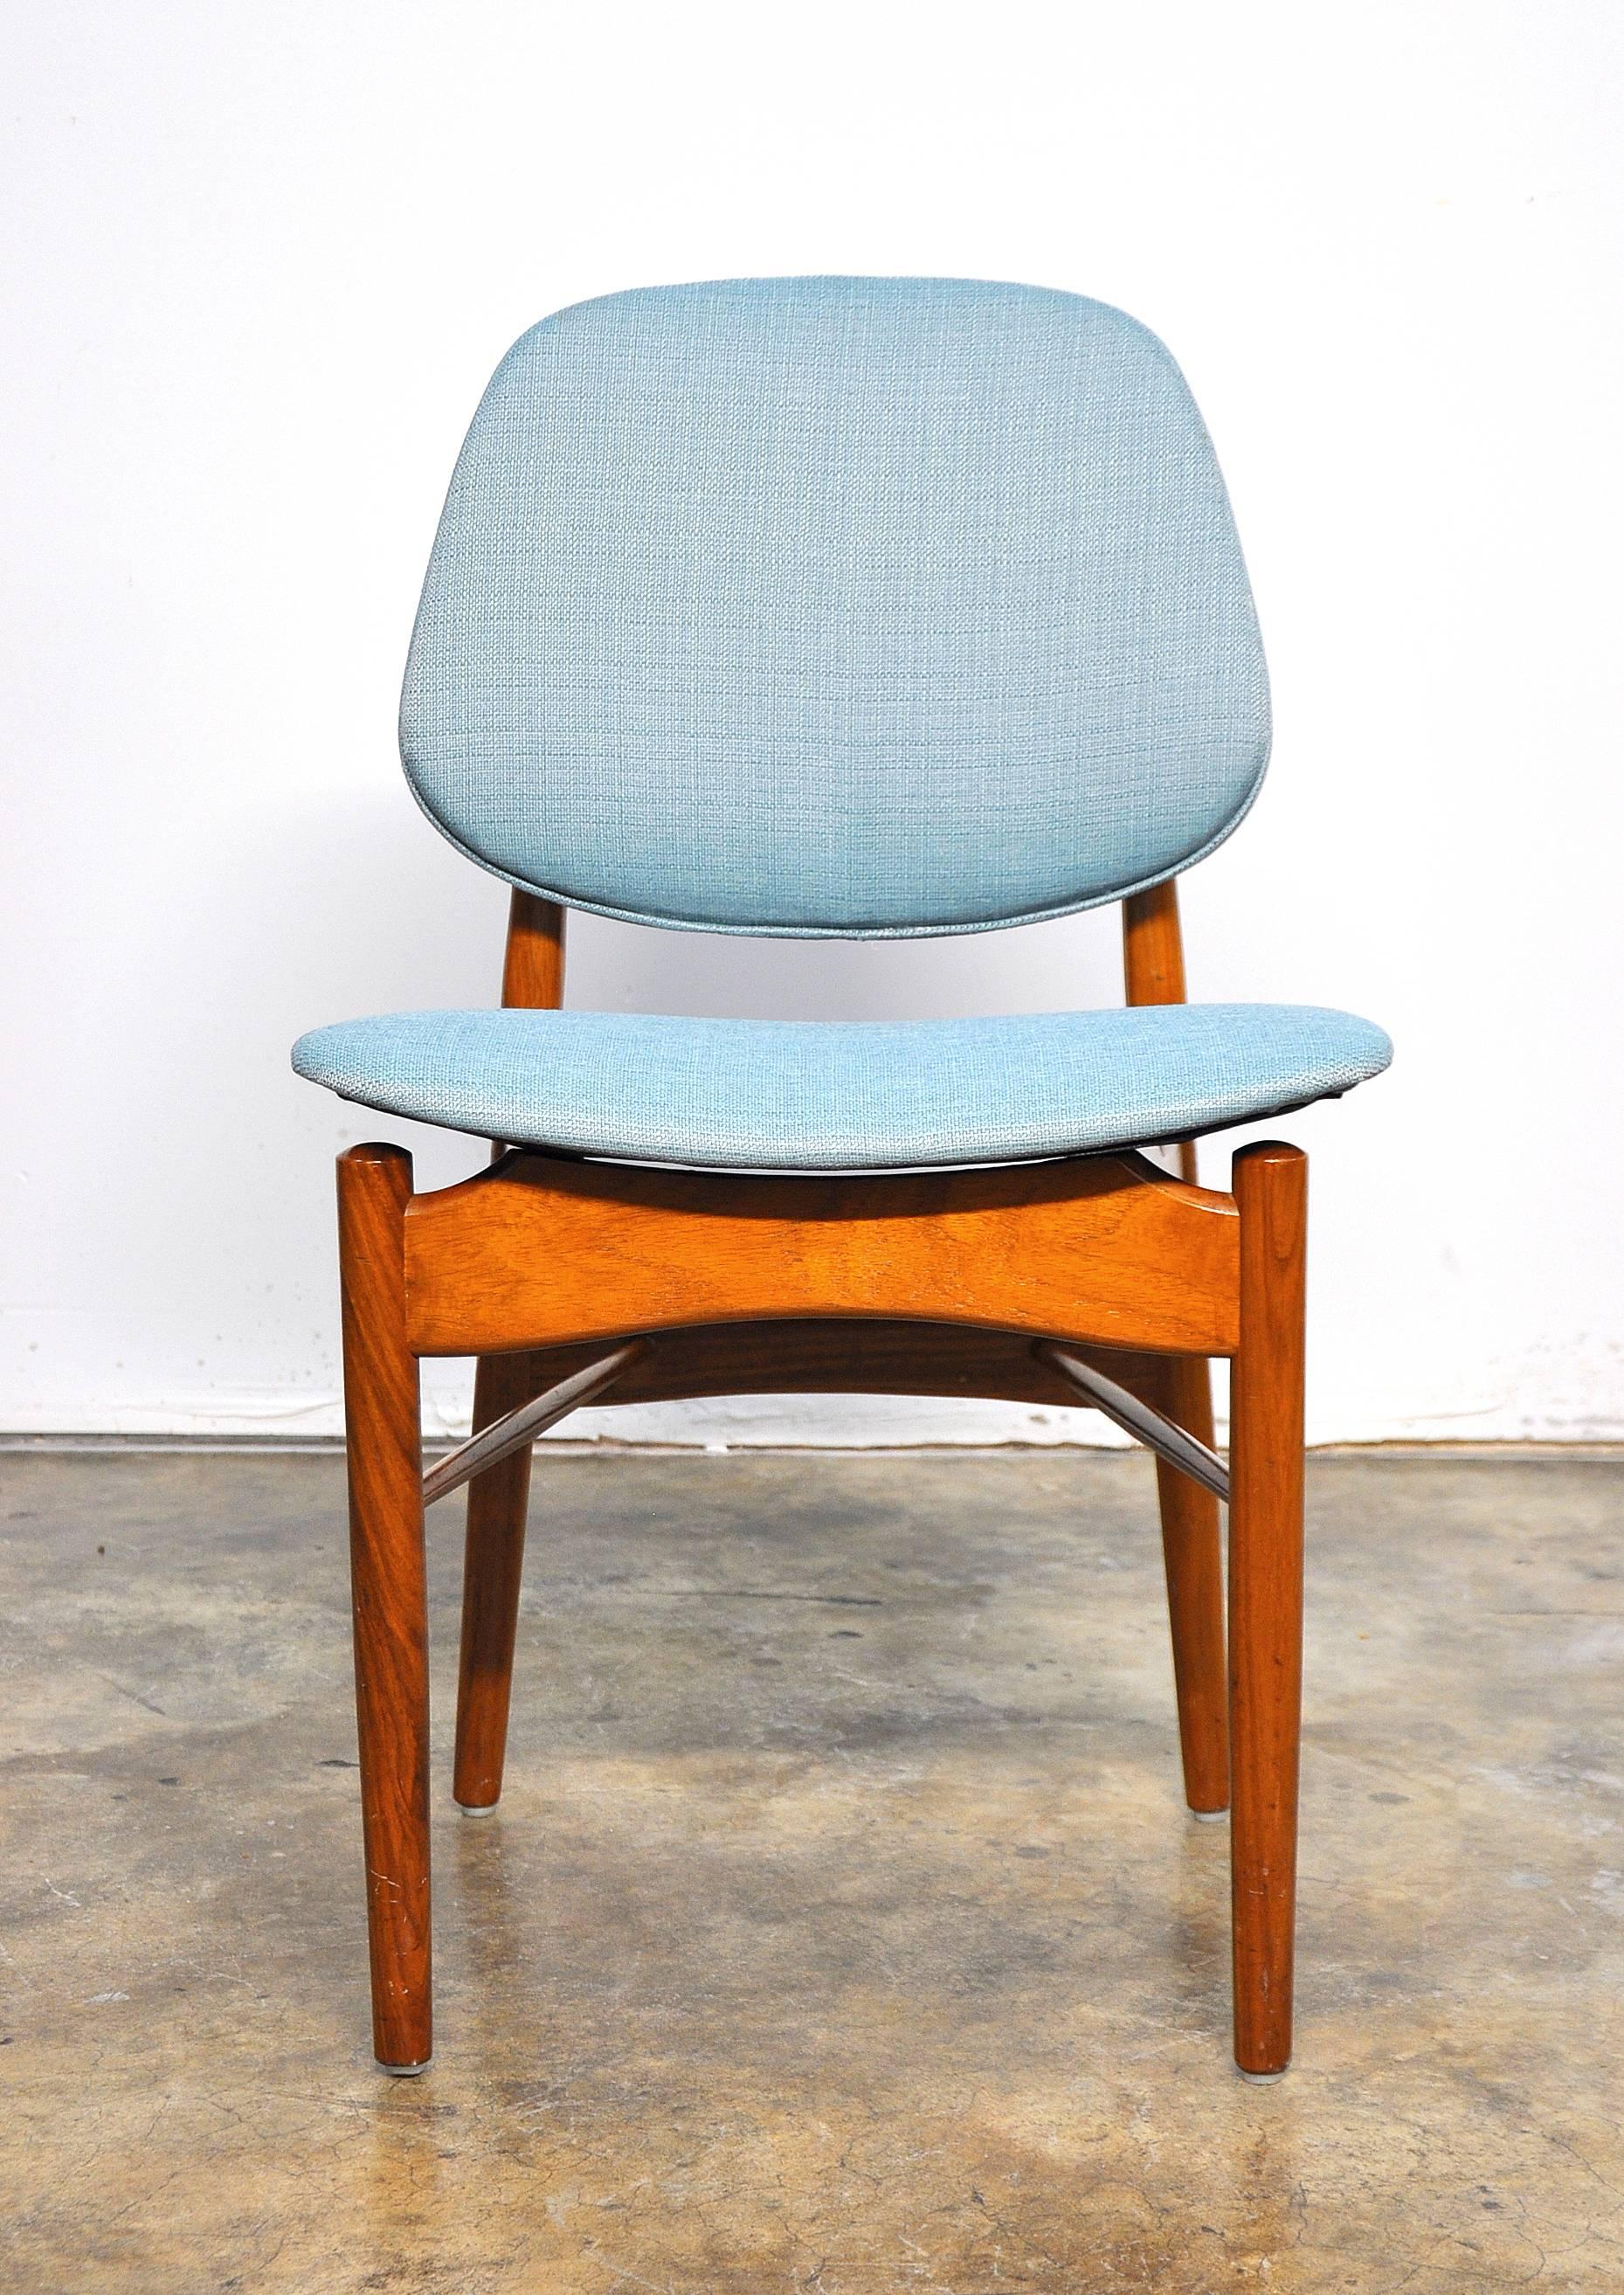 Mid-20th Century Set of Four Teak Dining Chairs, Attributed to Finn Juhl